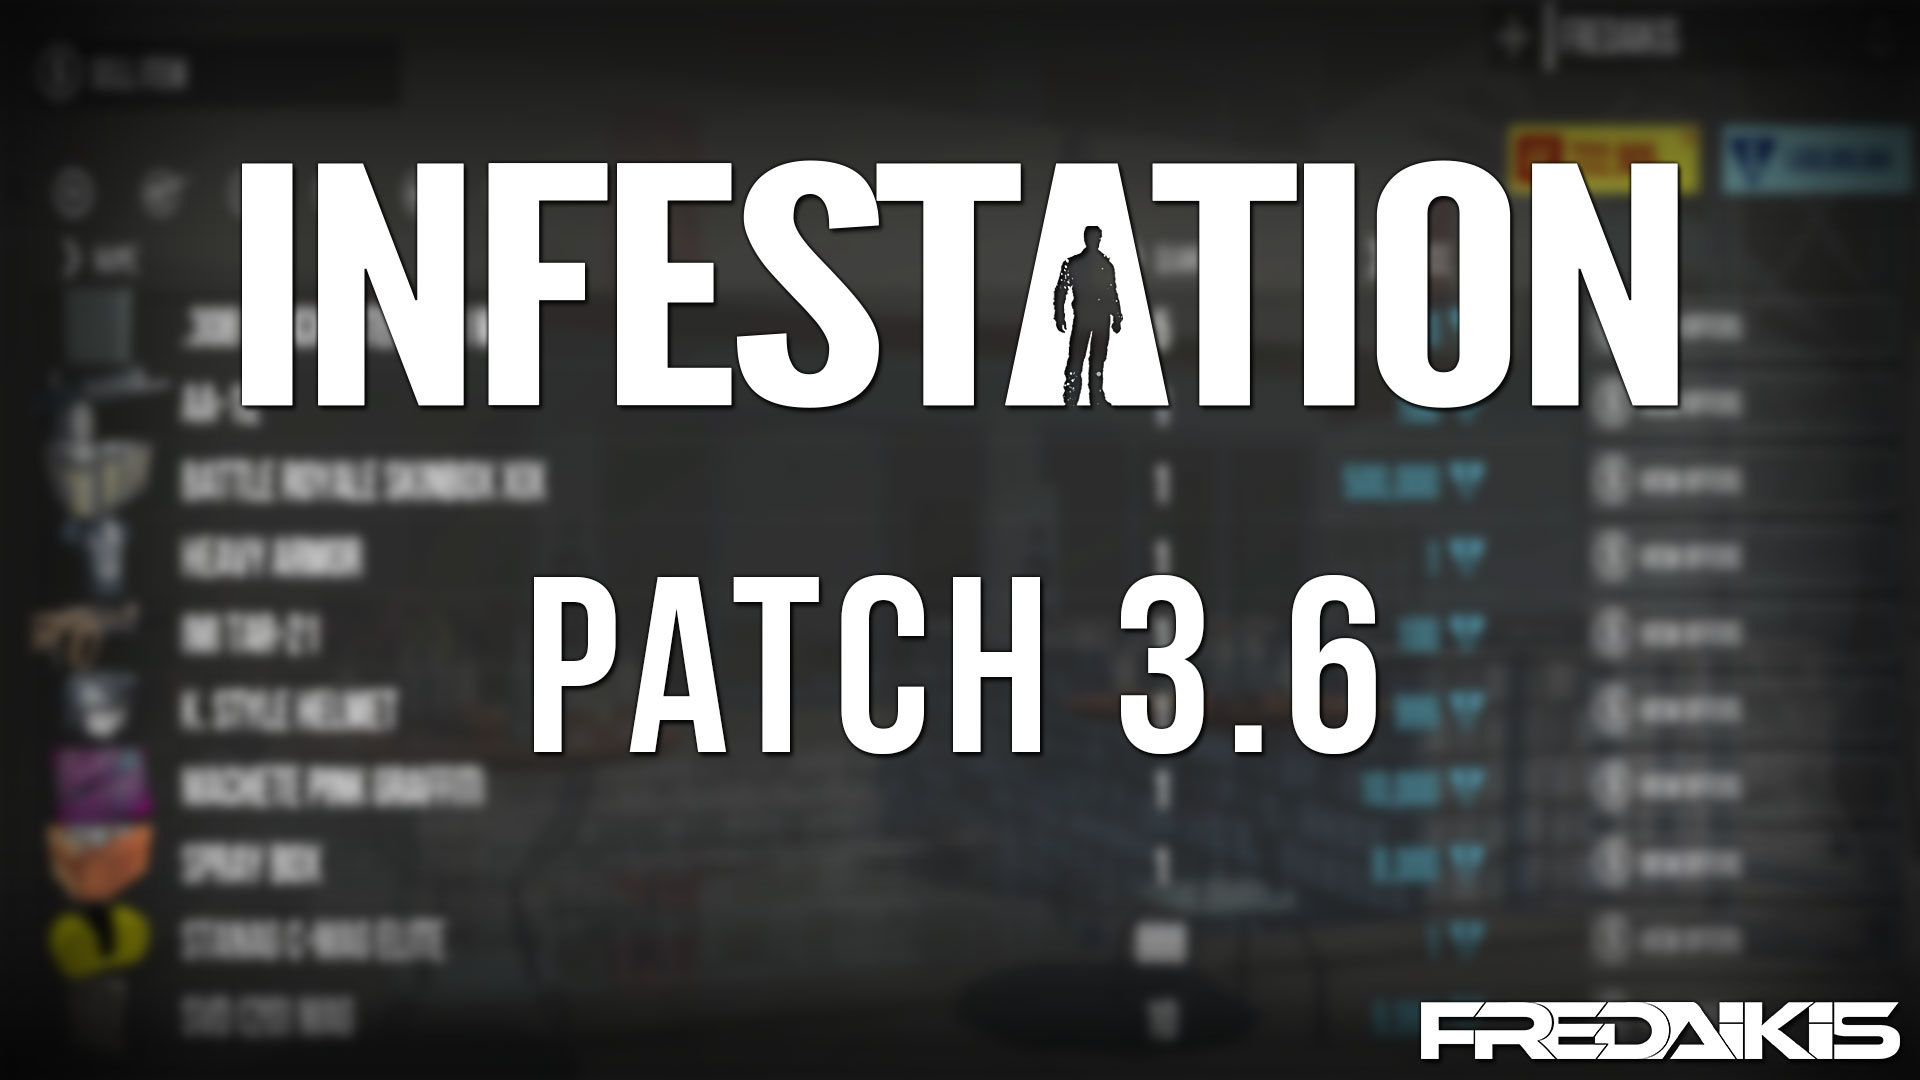 Patch 3.6 · Infestation: The New Z update for 1 July 2020 · SteamDB